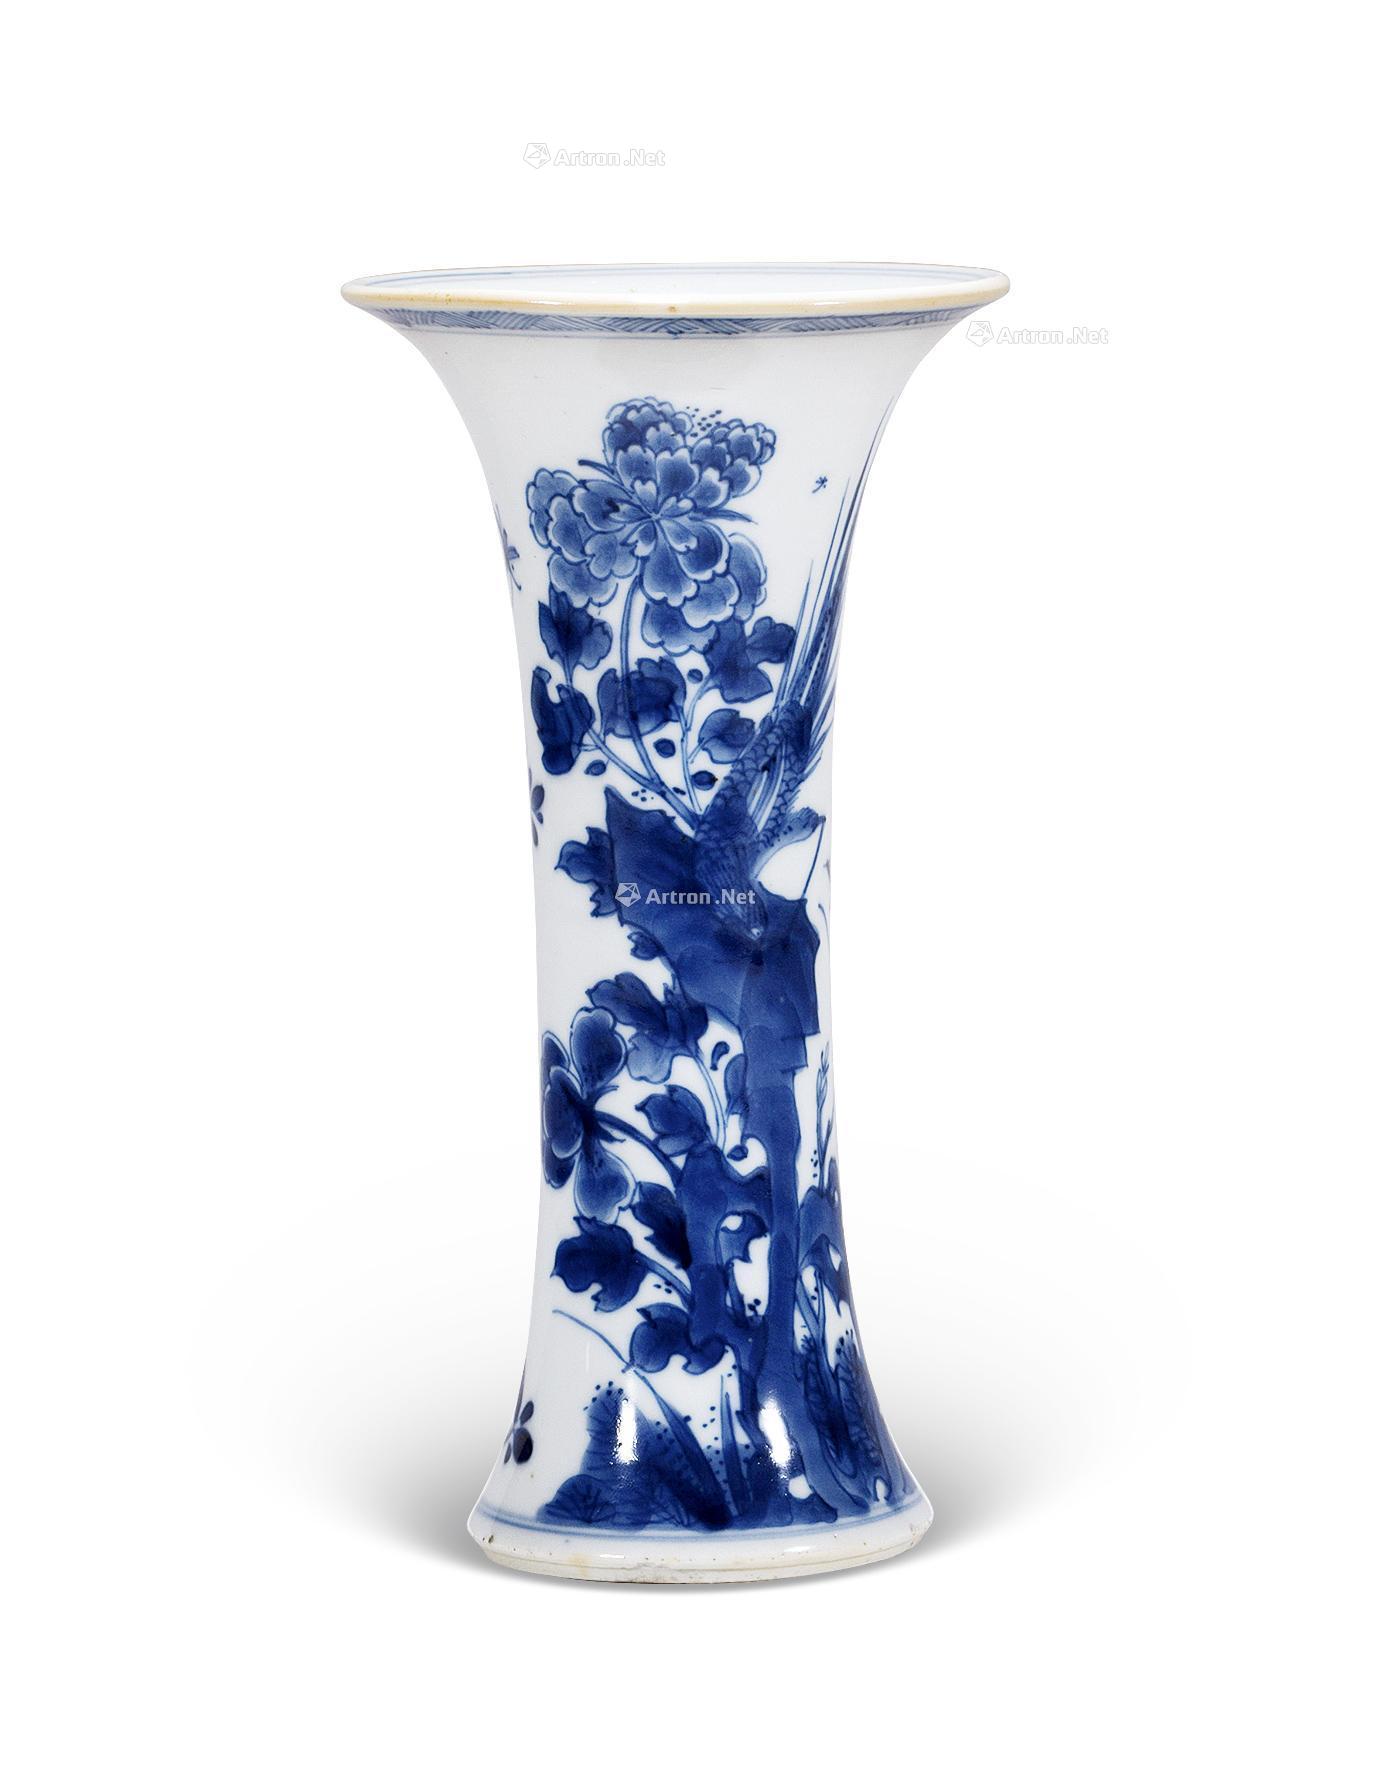 Qing dynasty blue and white pheasant peony grains vase with flowers